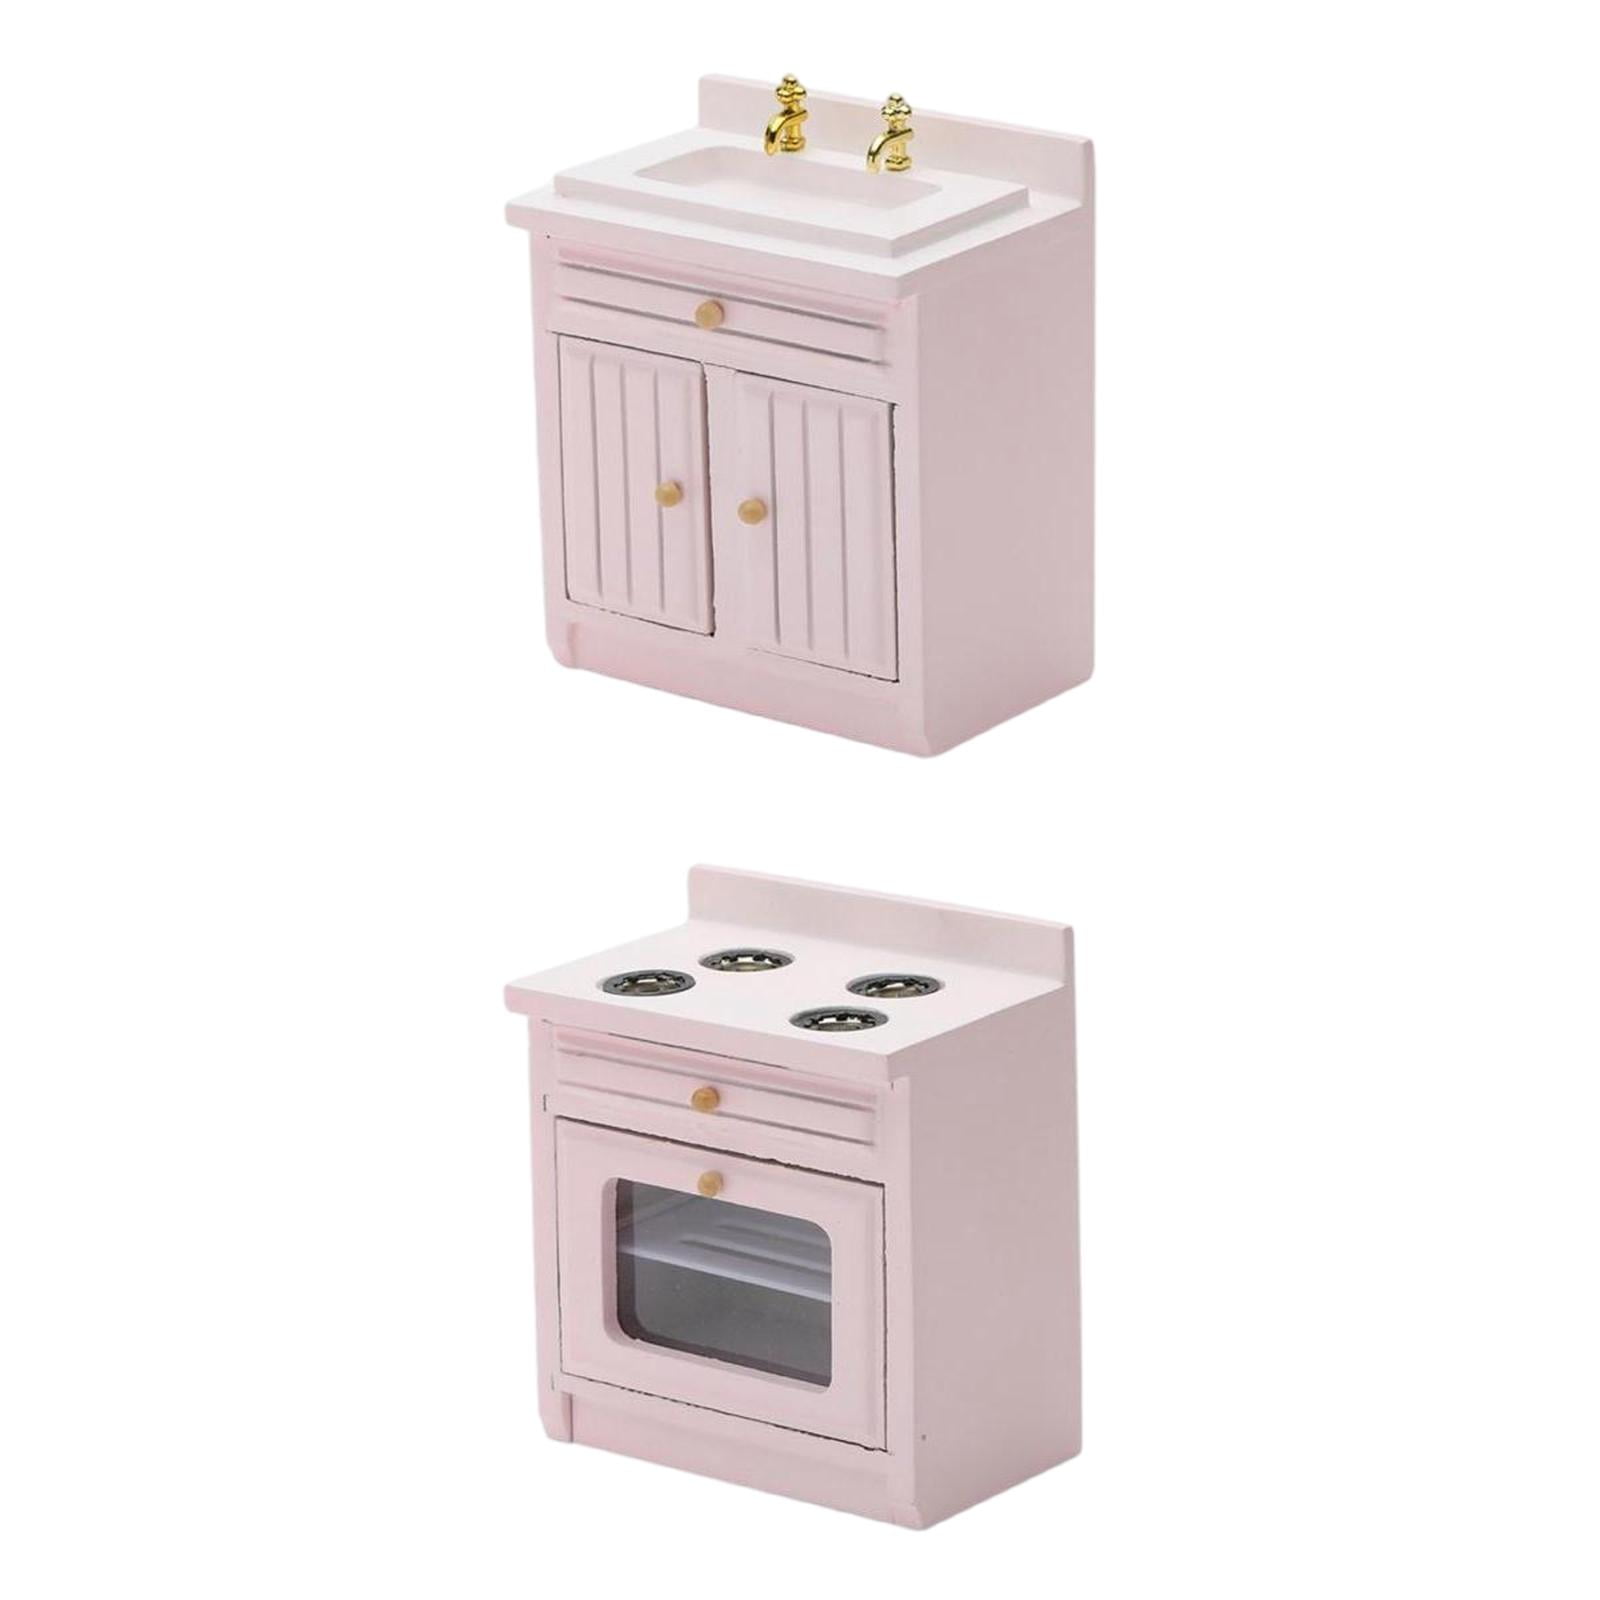 Nobranded 1/12 Scale Dollhouse Miniature Furniture Kitchen Cooking Cabinet Stove European Style Toy Kitchen Playset Kids Great Gift